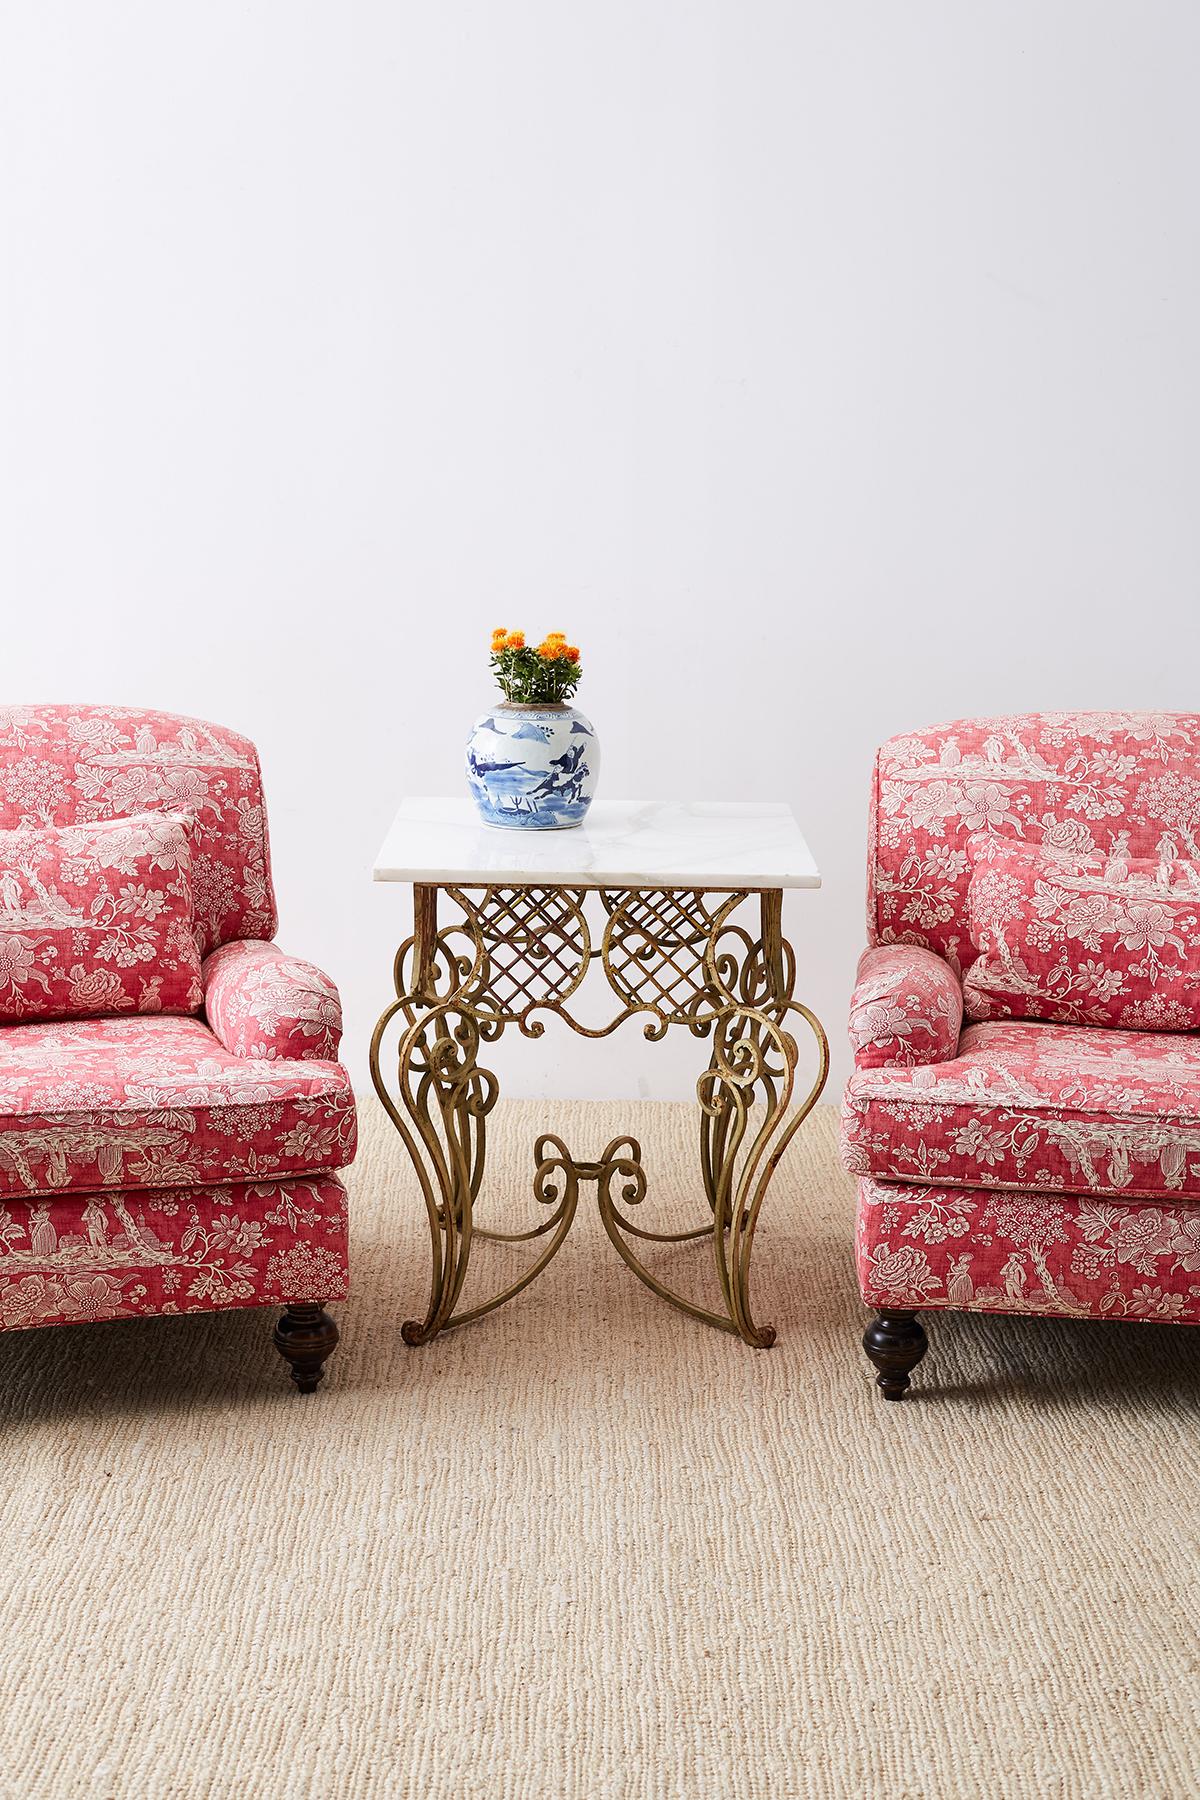 Fabulous pair of French Provincial toile oversized lounge chairs upholstered in a chinoiserie red toile de jouy printed fabric. Constructed with large heavy mahogany frames featuring an English rolled arm and a deep seat cushion. Very comfortable